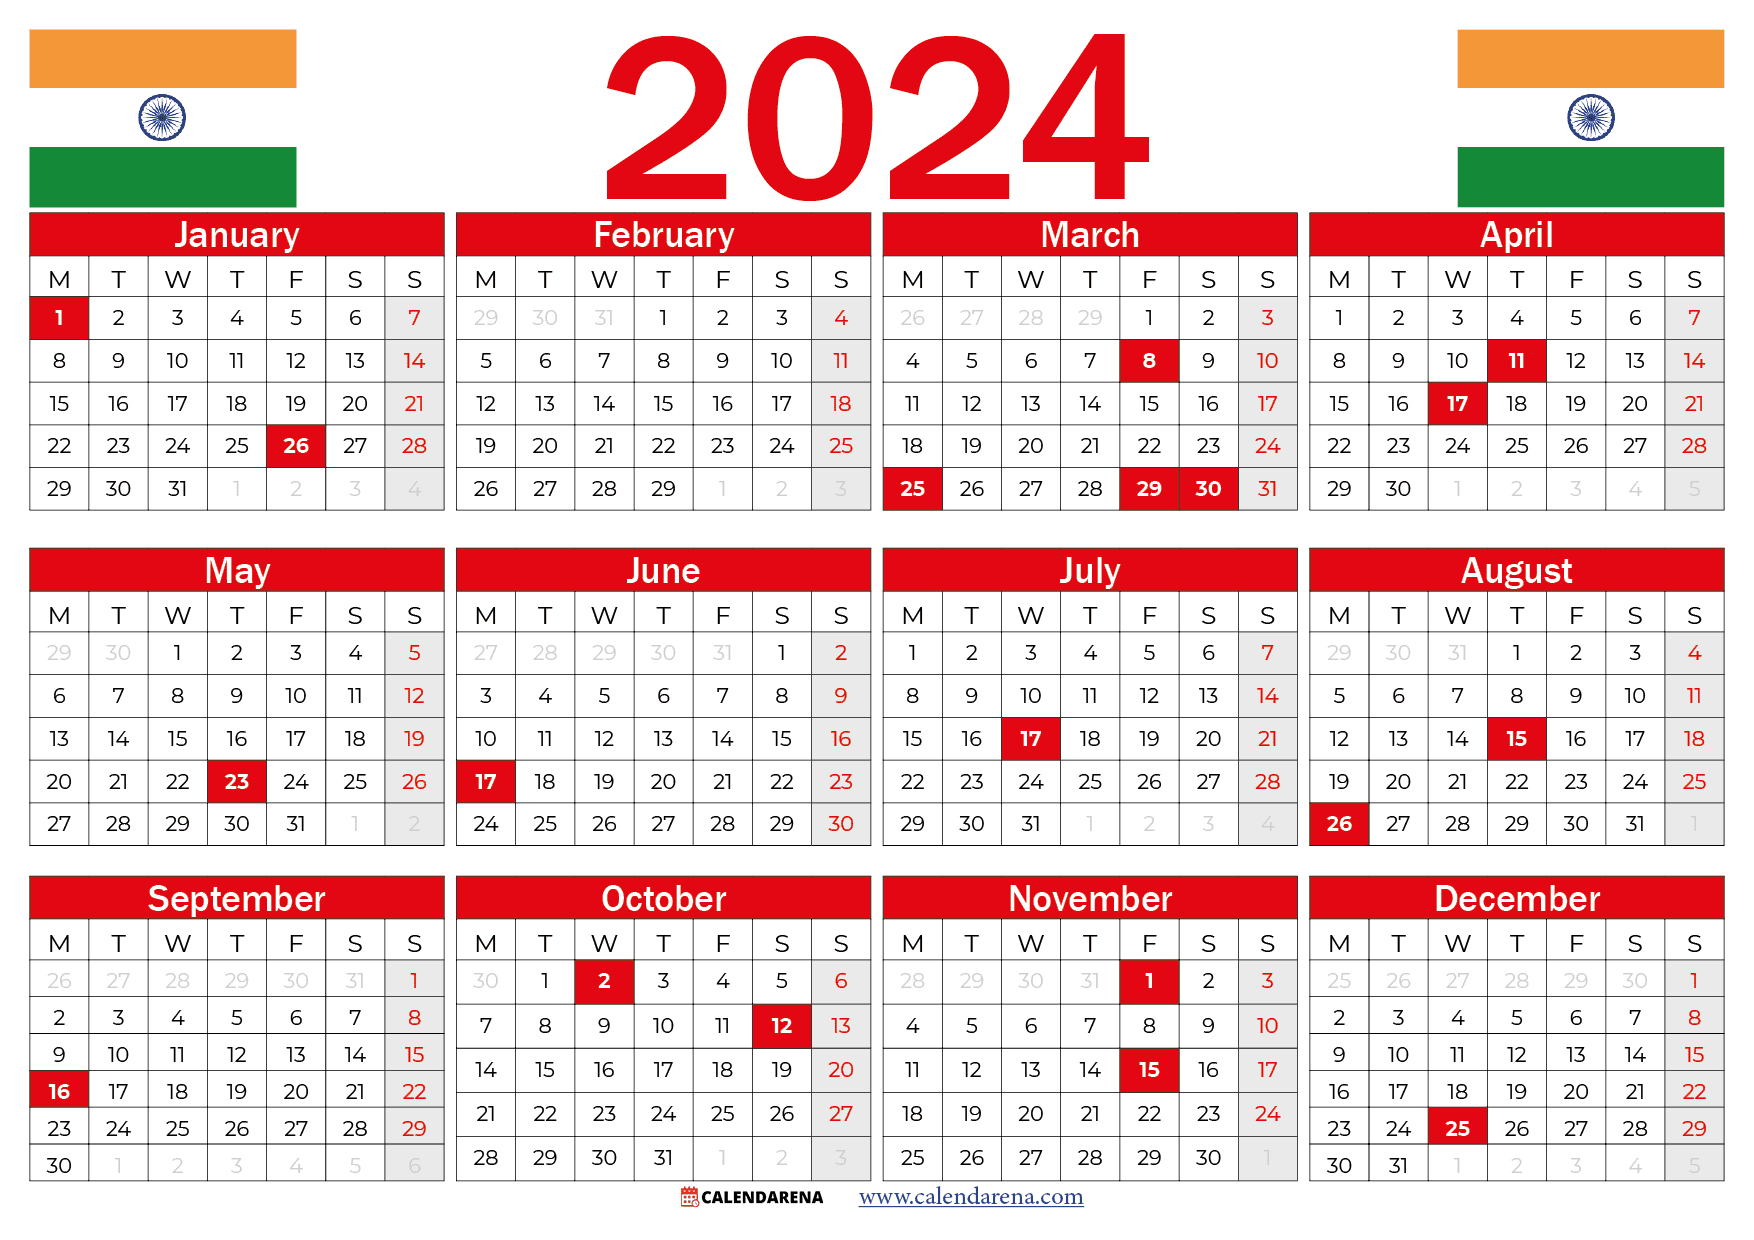 Calendar 2023 India With Holidays And Festivals | Printable Calendar 2024 With Holidays India